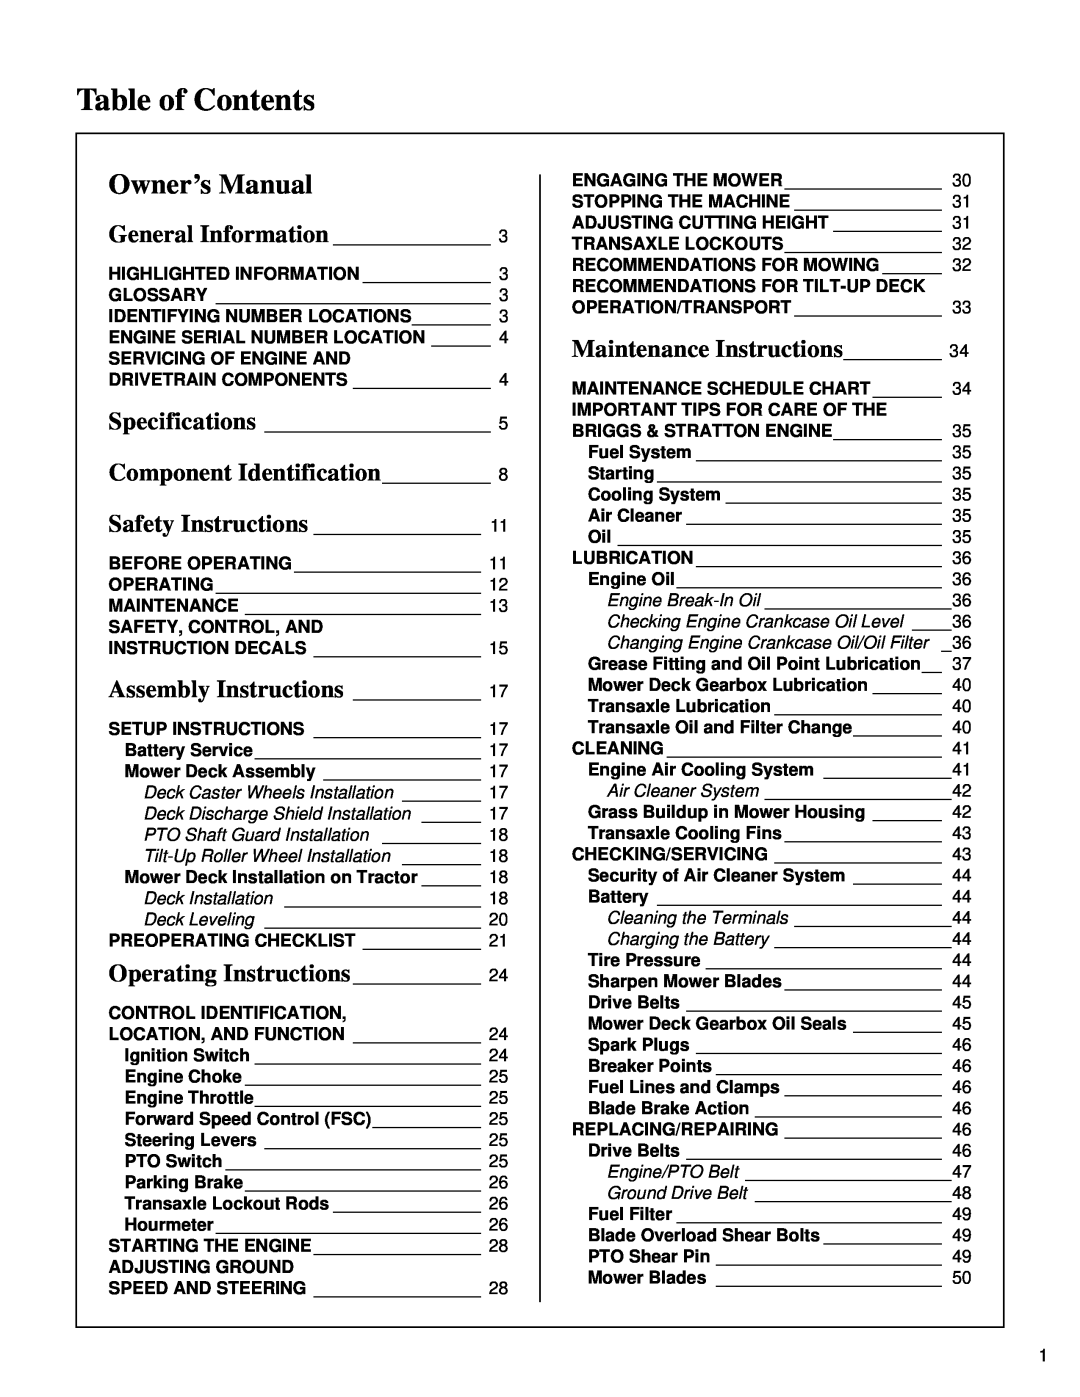 Briggs & Stratton MB (18 HP) owner manual Table of Contents, Owner’s Manual, General Information, Assembly Instructions 